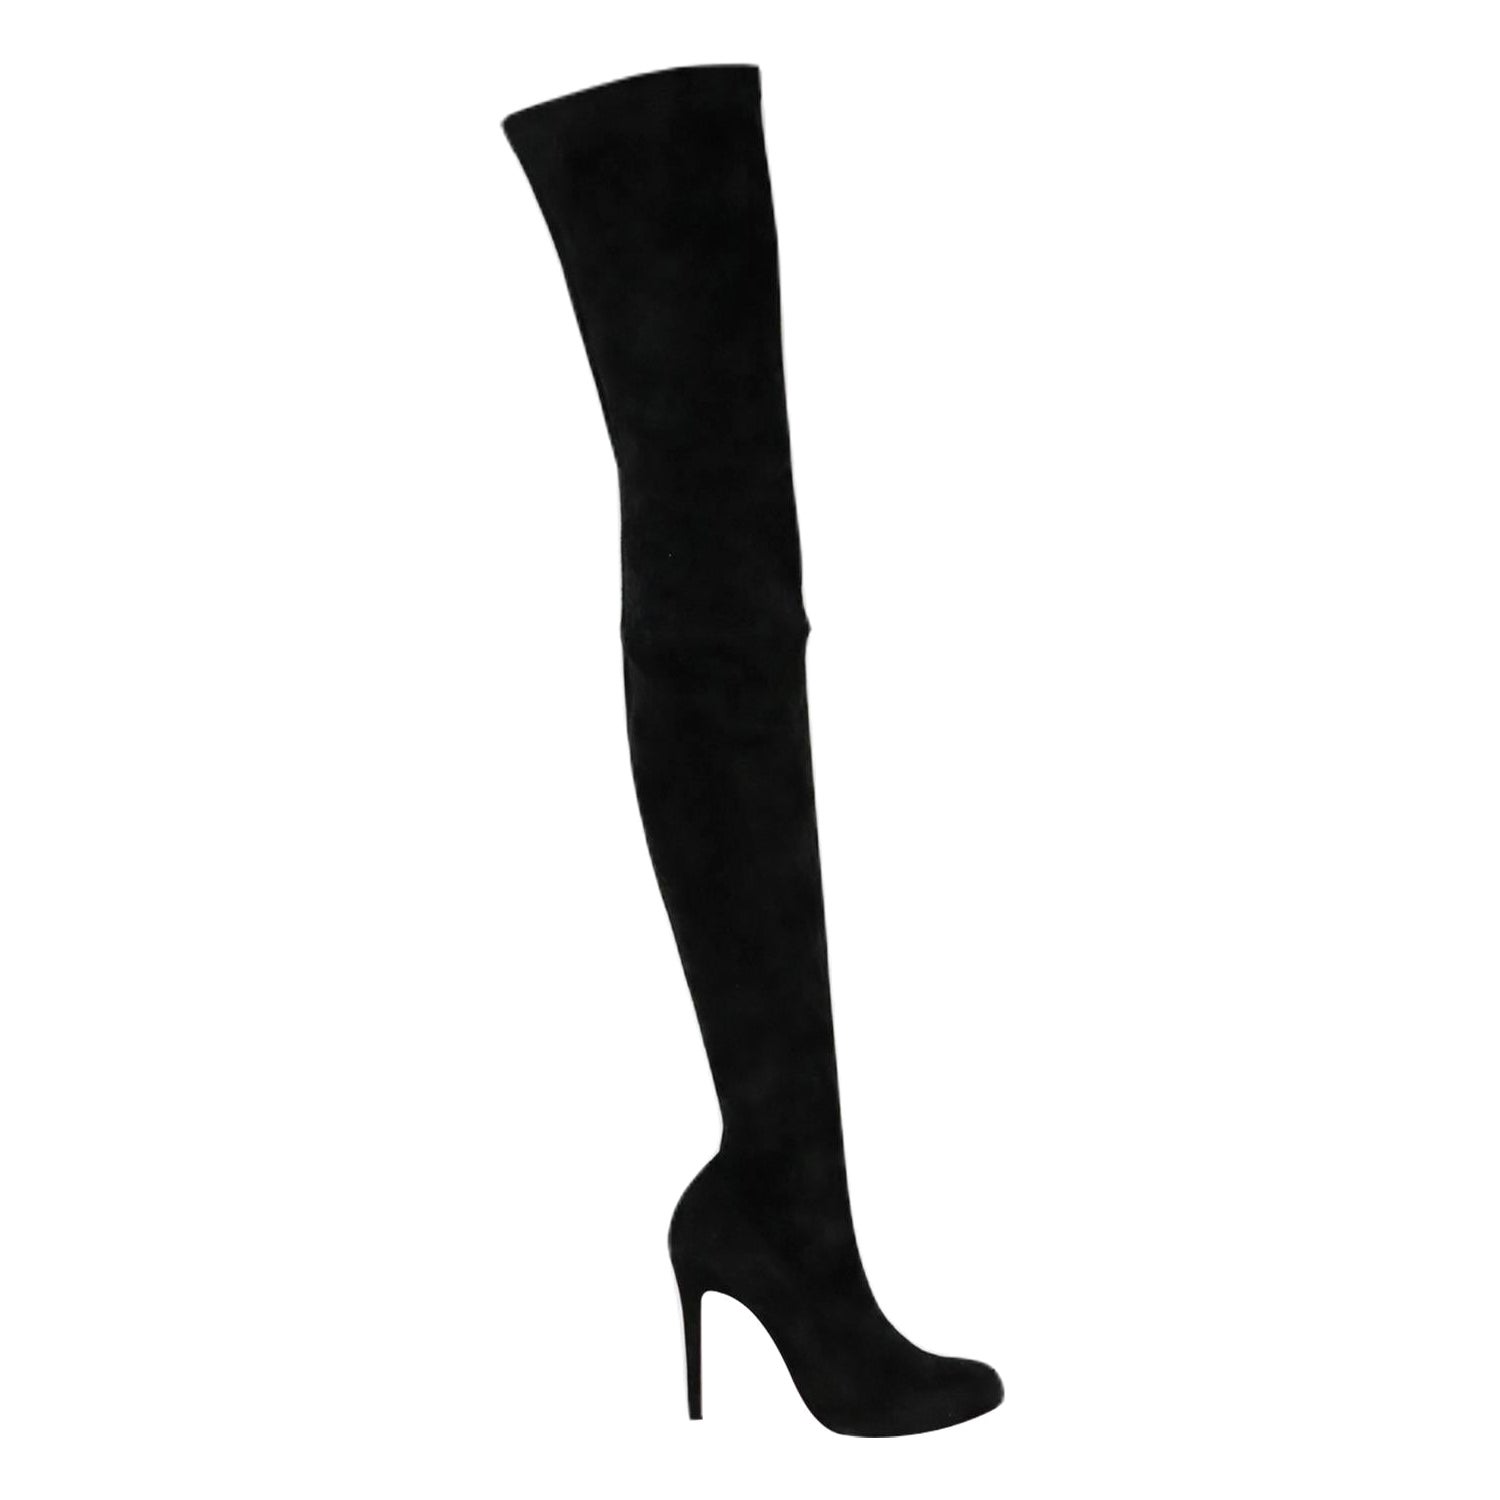 Christian Louboutin Stretch Suede Over The Knee Boots Eu 38.5 Uk 5.5 Us 9.5